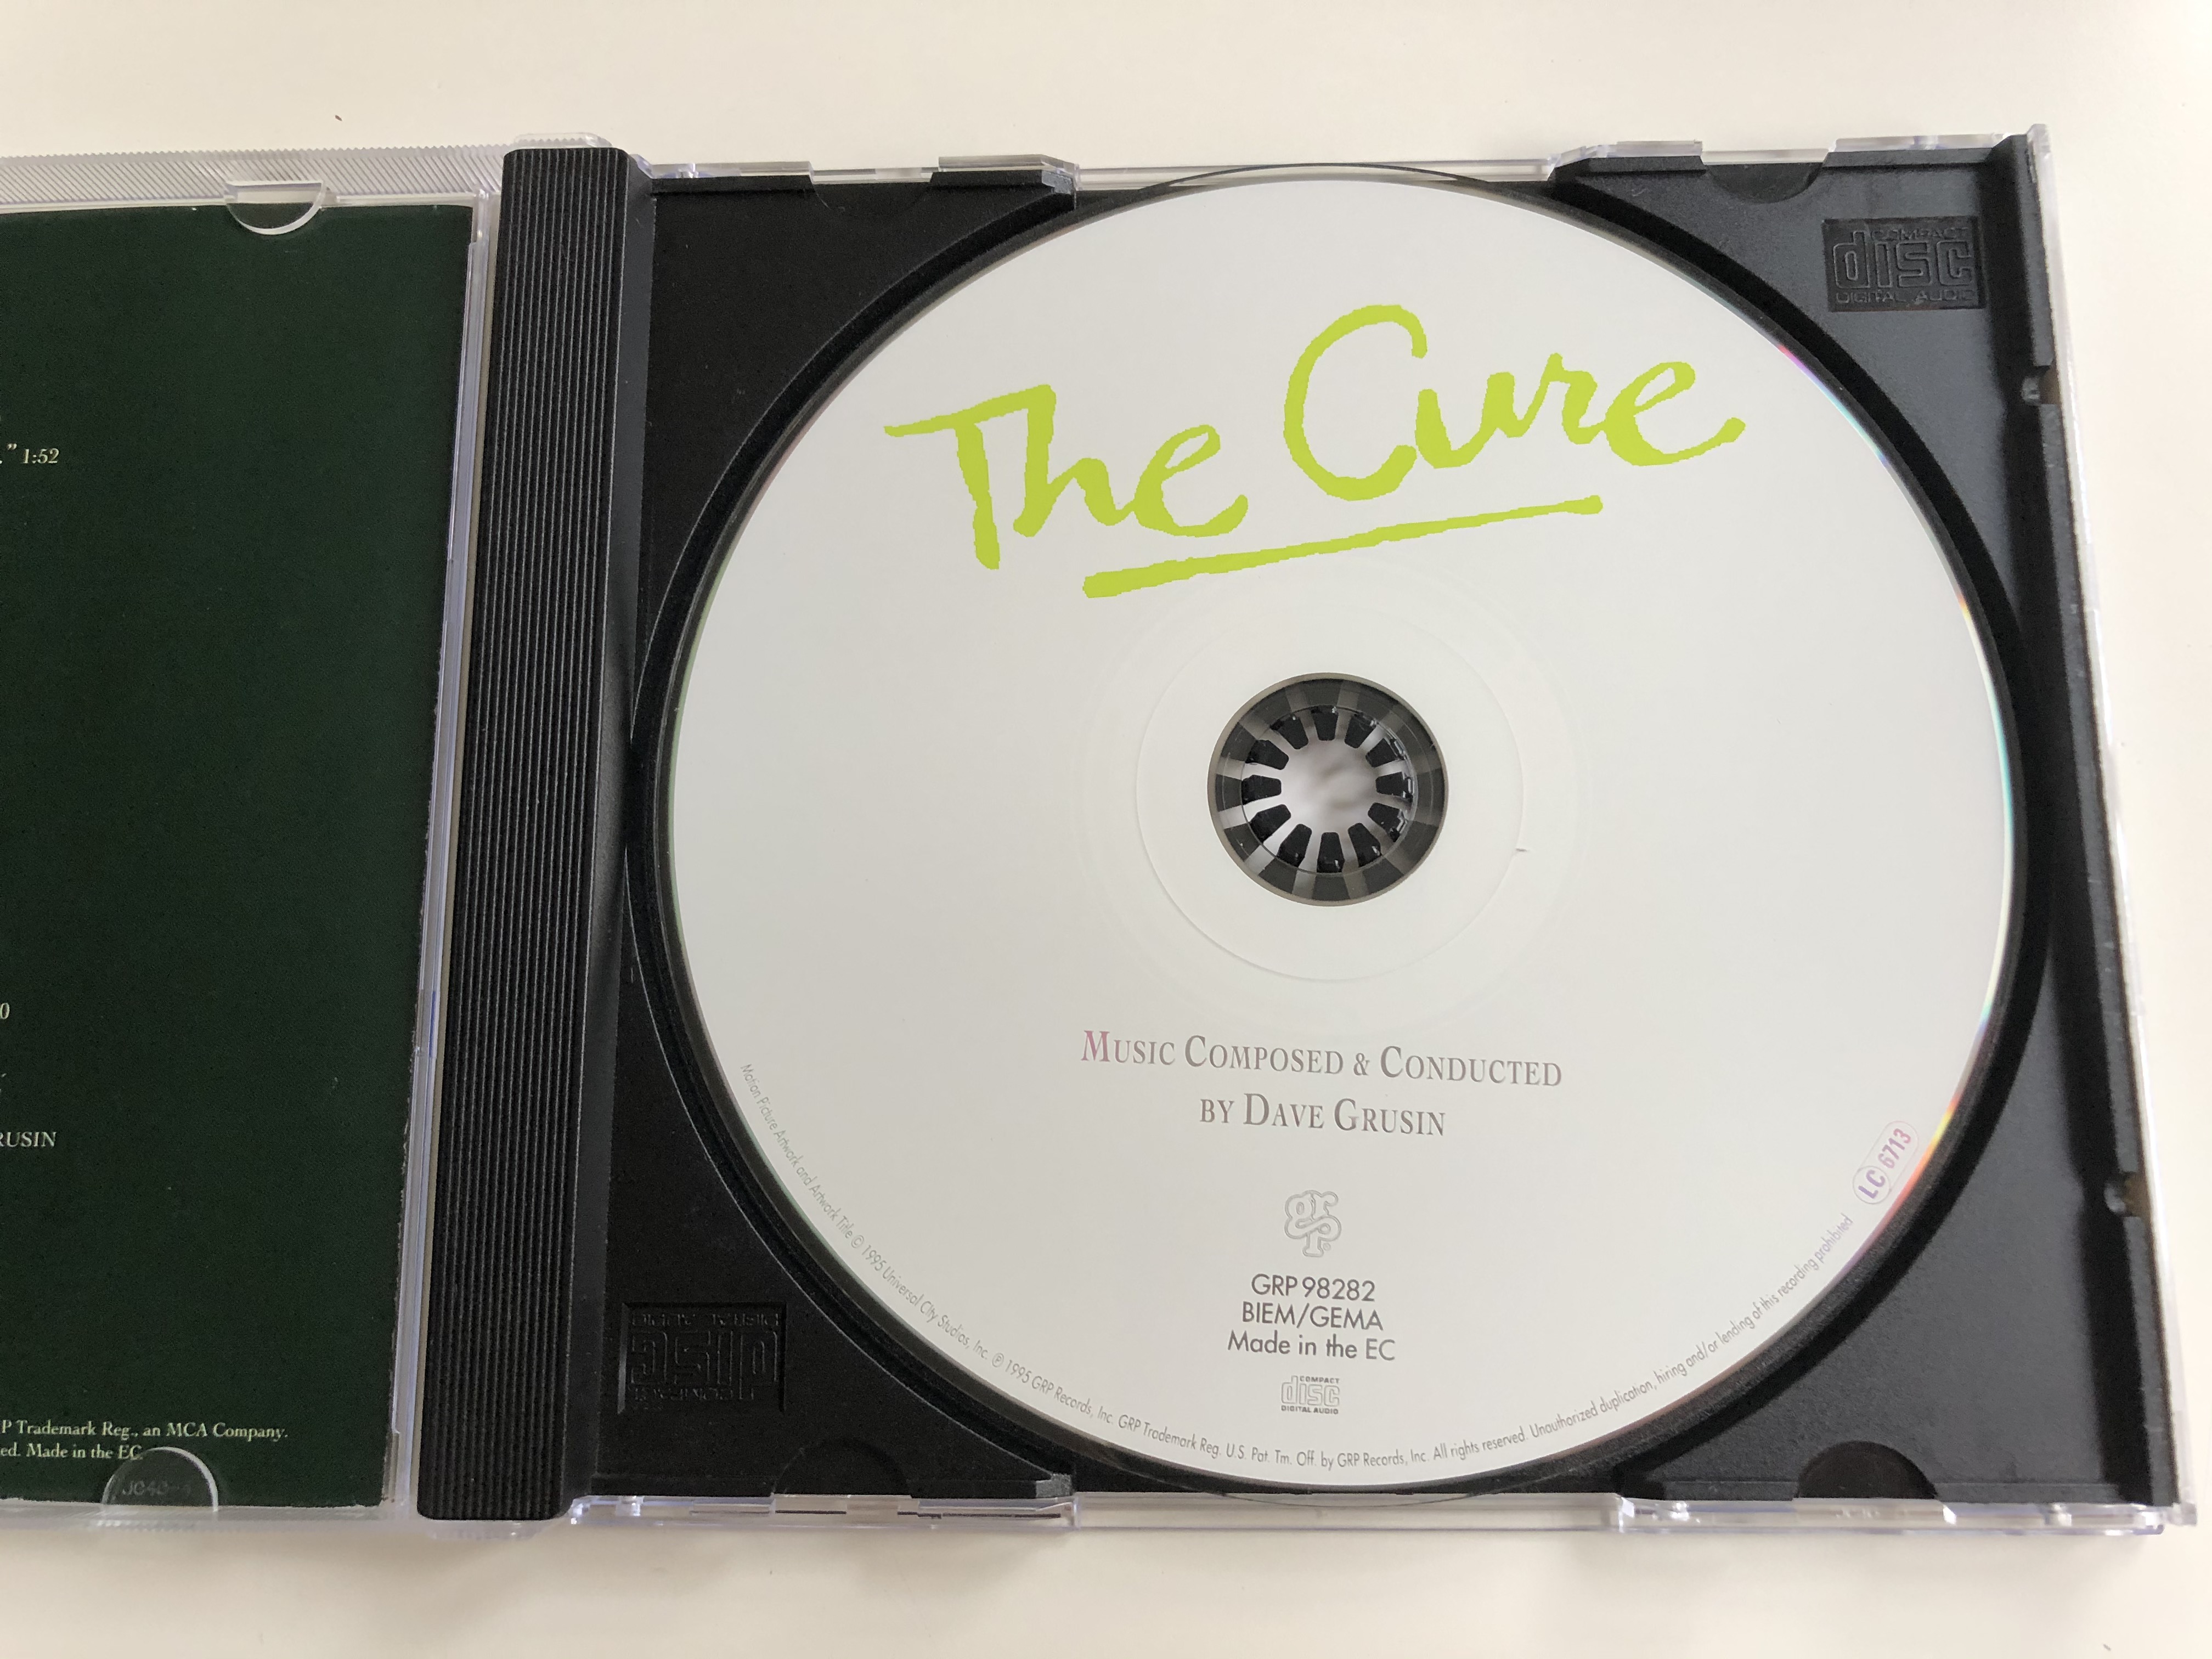 the-cure-original-motion-picture-soundtrack-music-composed-conducted-by-dave-grusin-two-boys-found-way-to-make-one-summer-lost-a-lifetime-grp-audio-cd-1995-grp-98282-5-.jpg